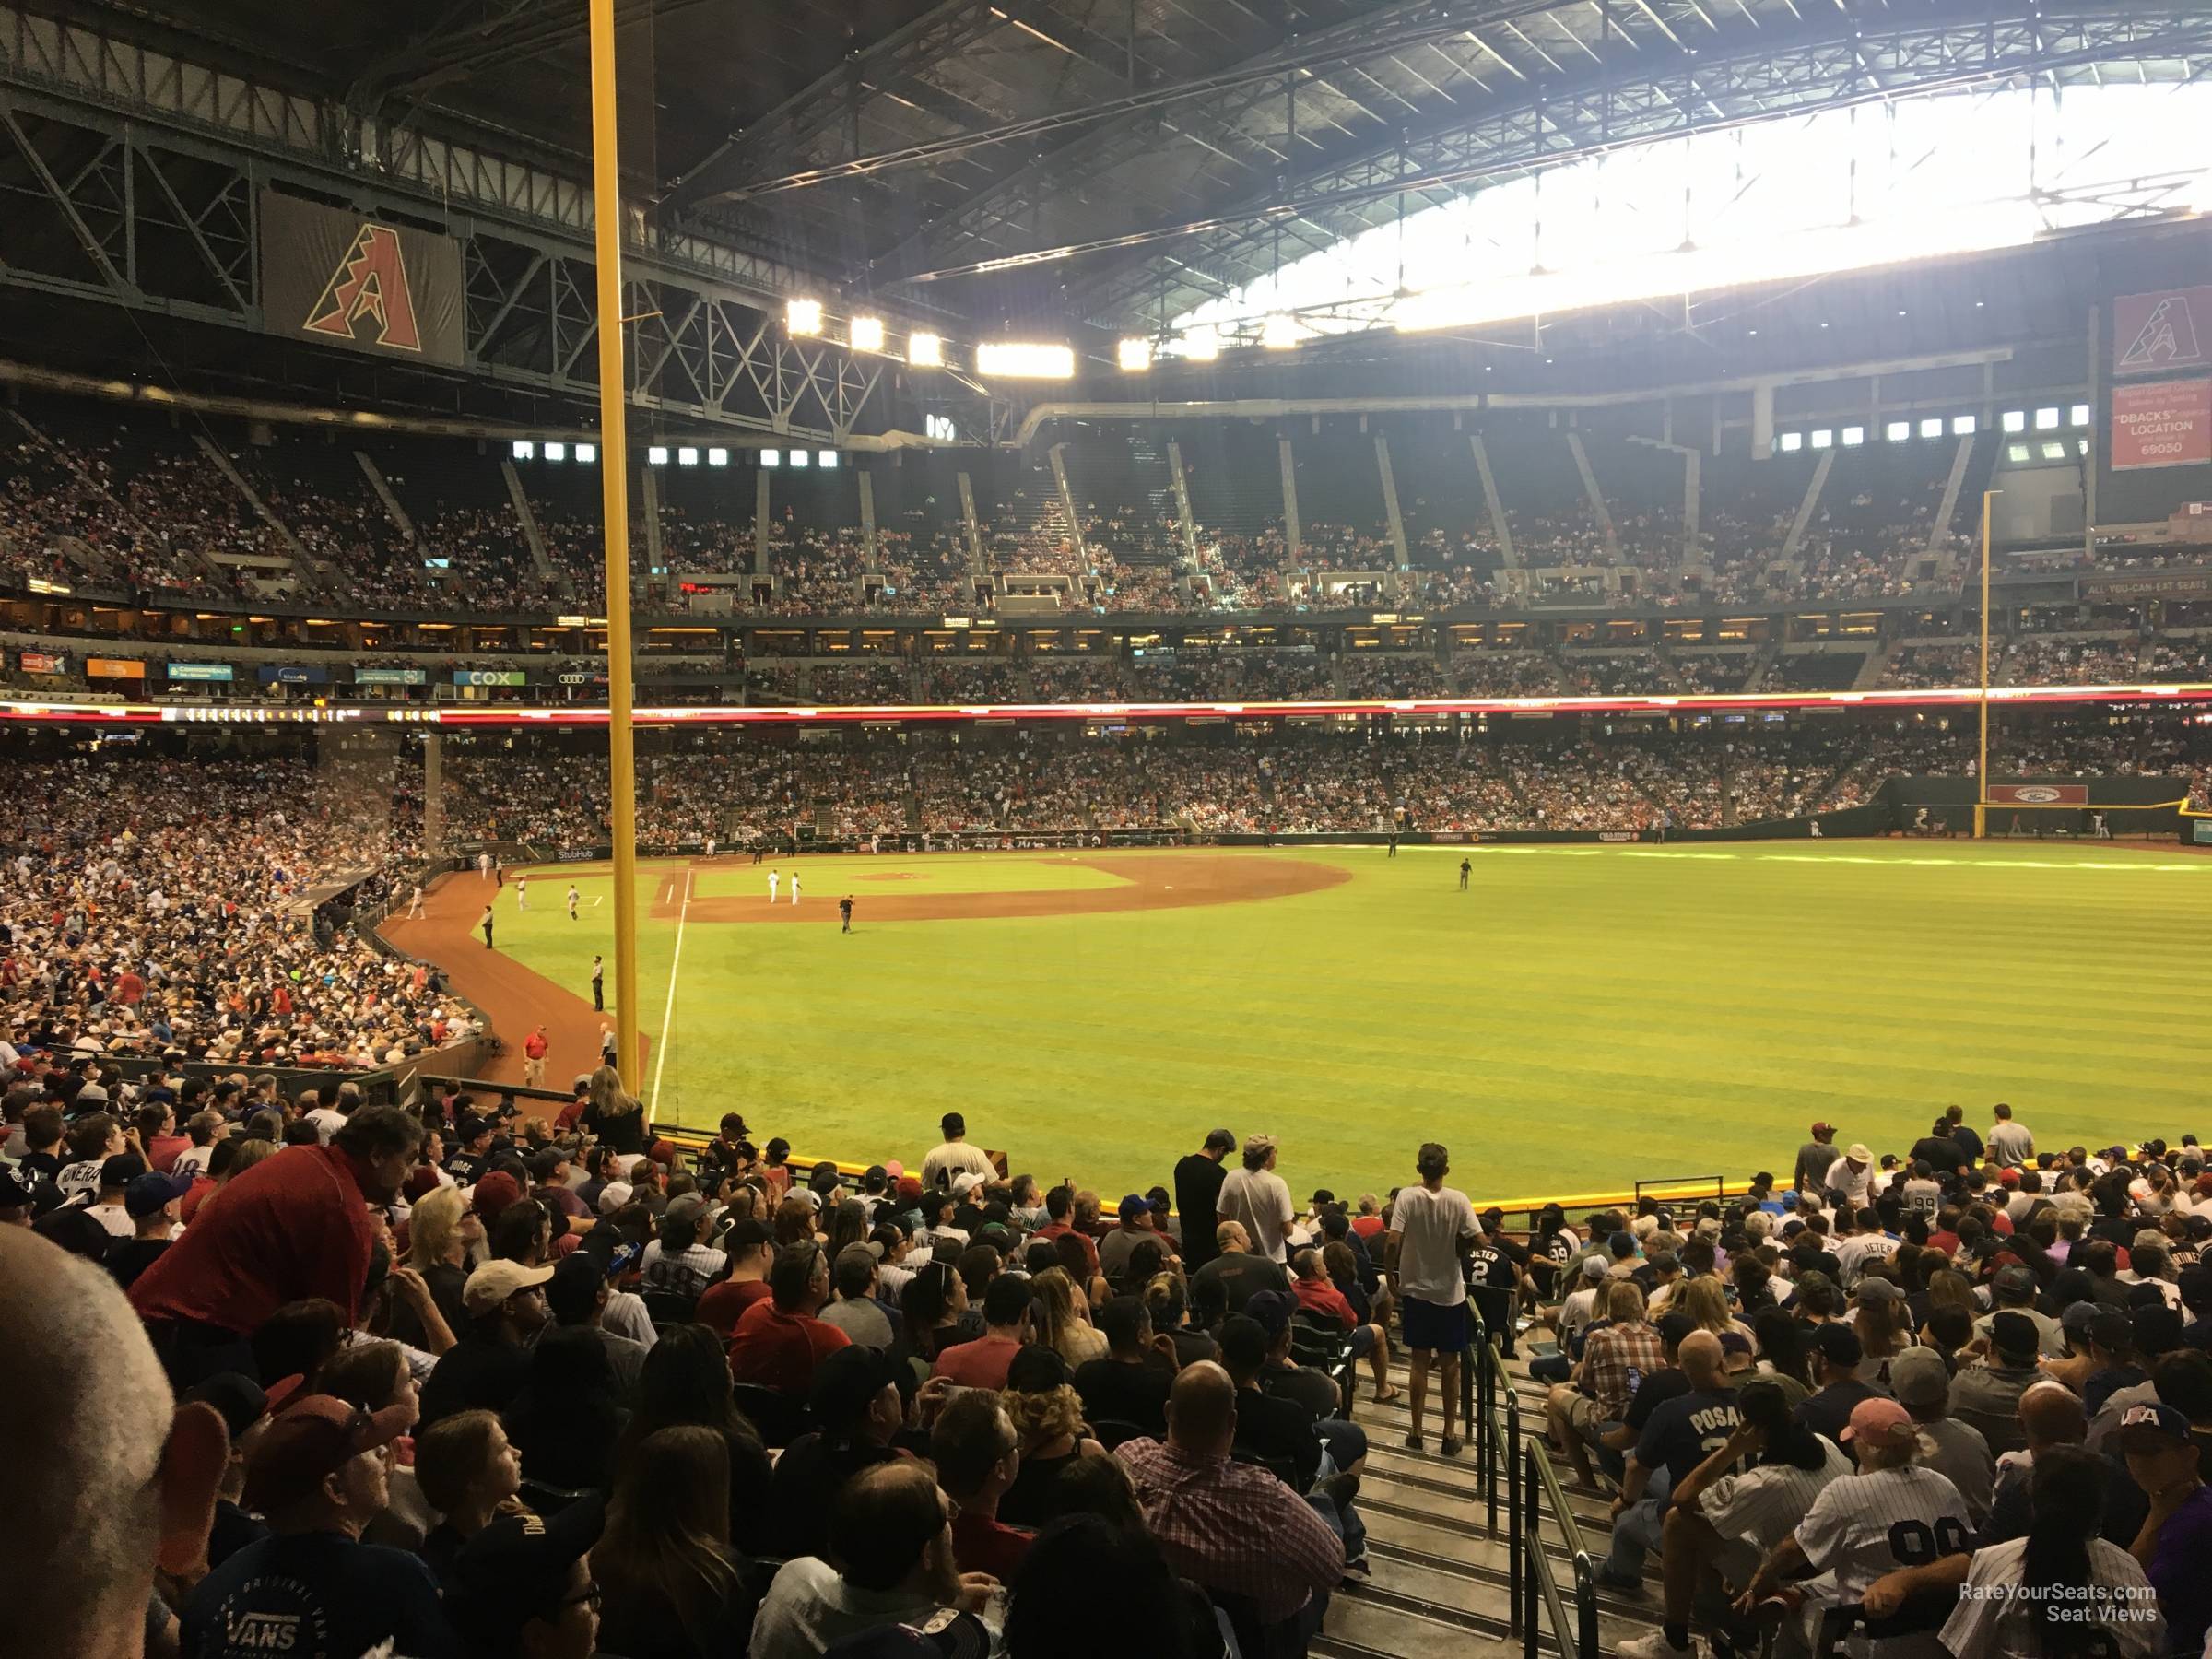 section 106, row 39 seat view  for baseball - chase field